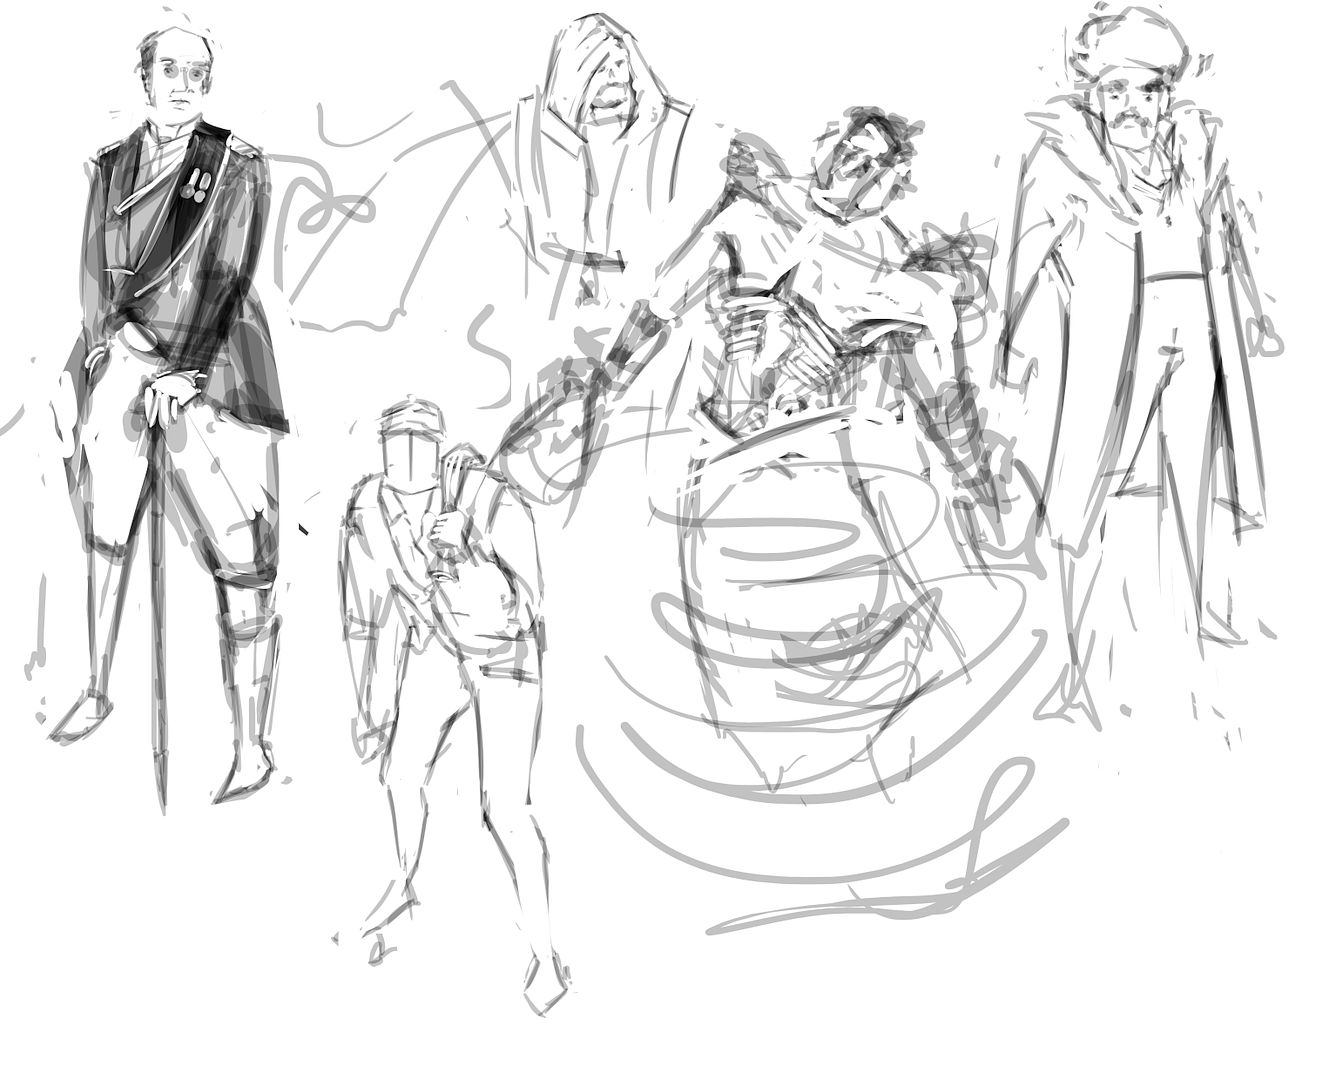 [Image: charactersketches8thfebcopy.jpg]